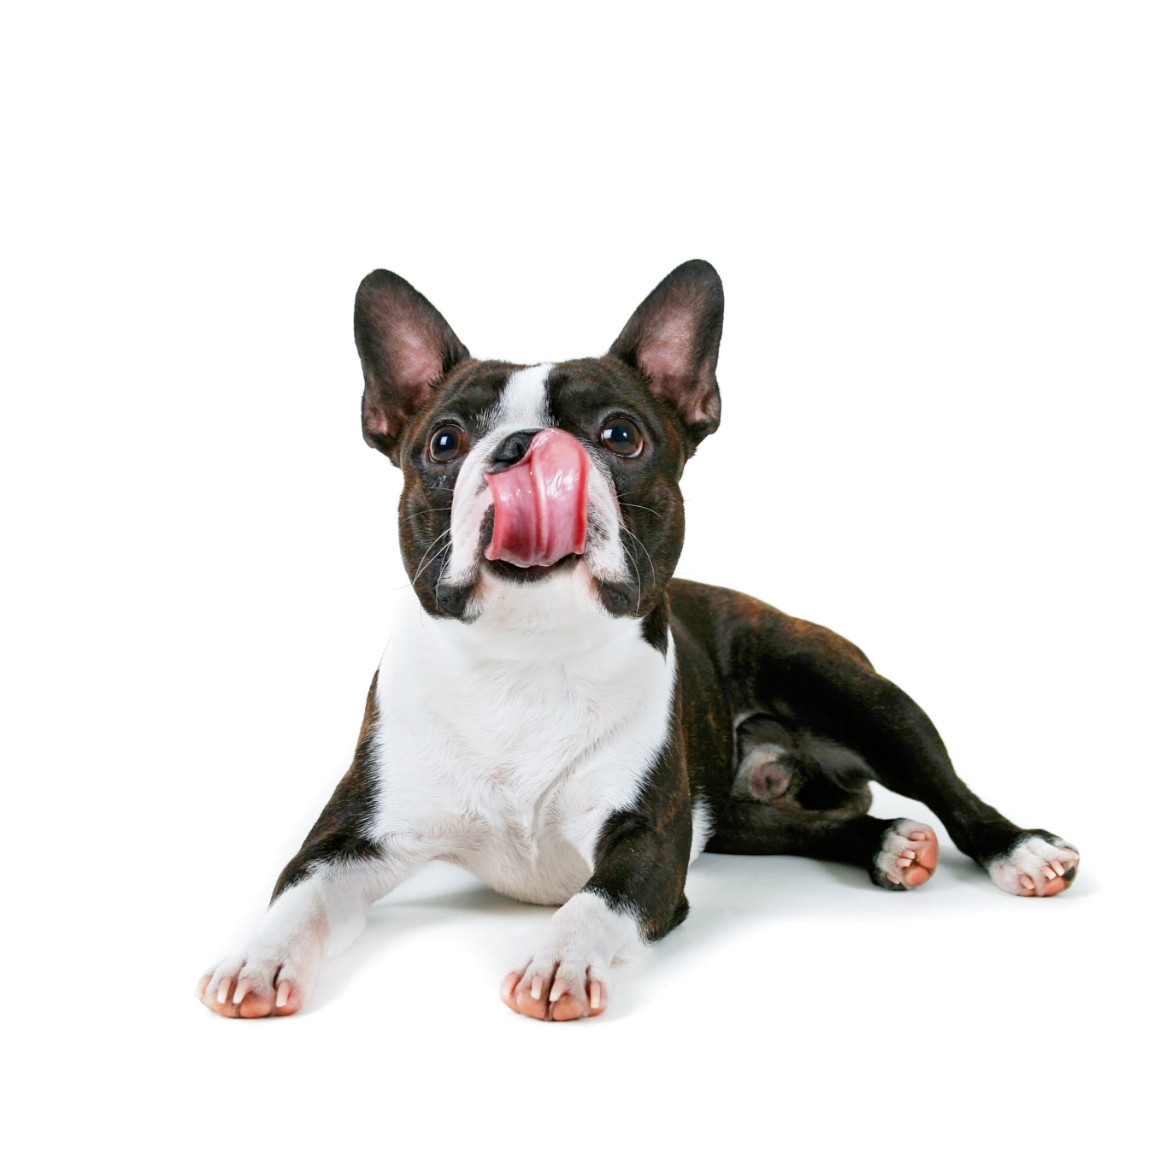 The Friendly and Amusing Boston Terrier